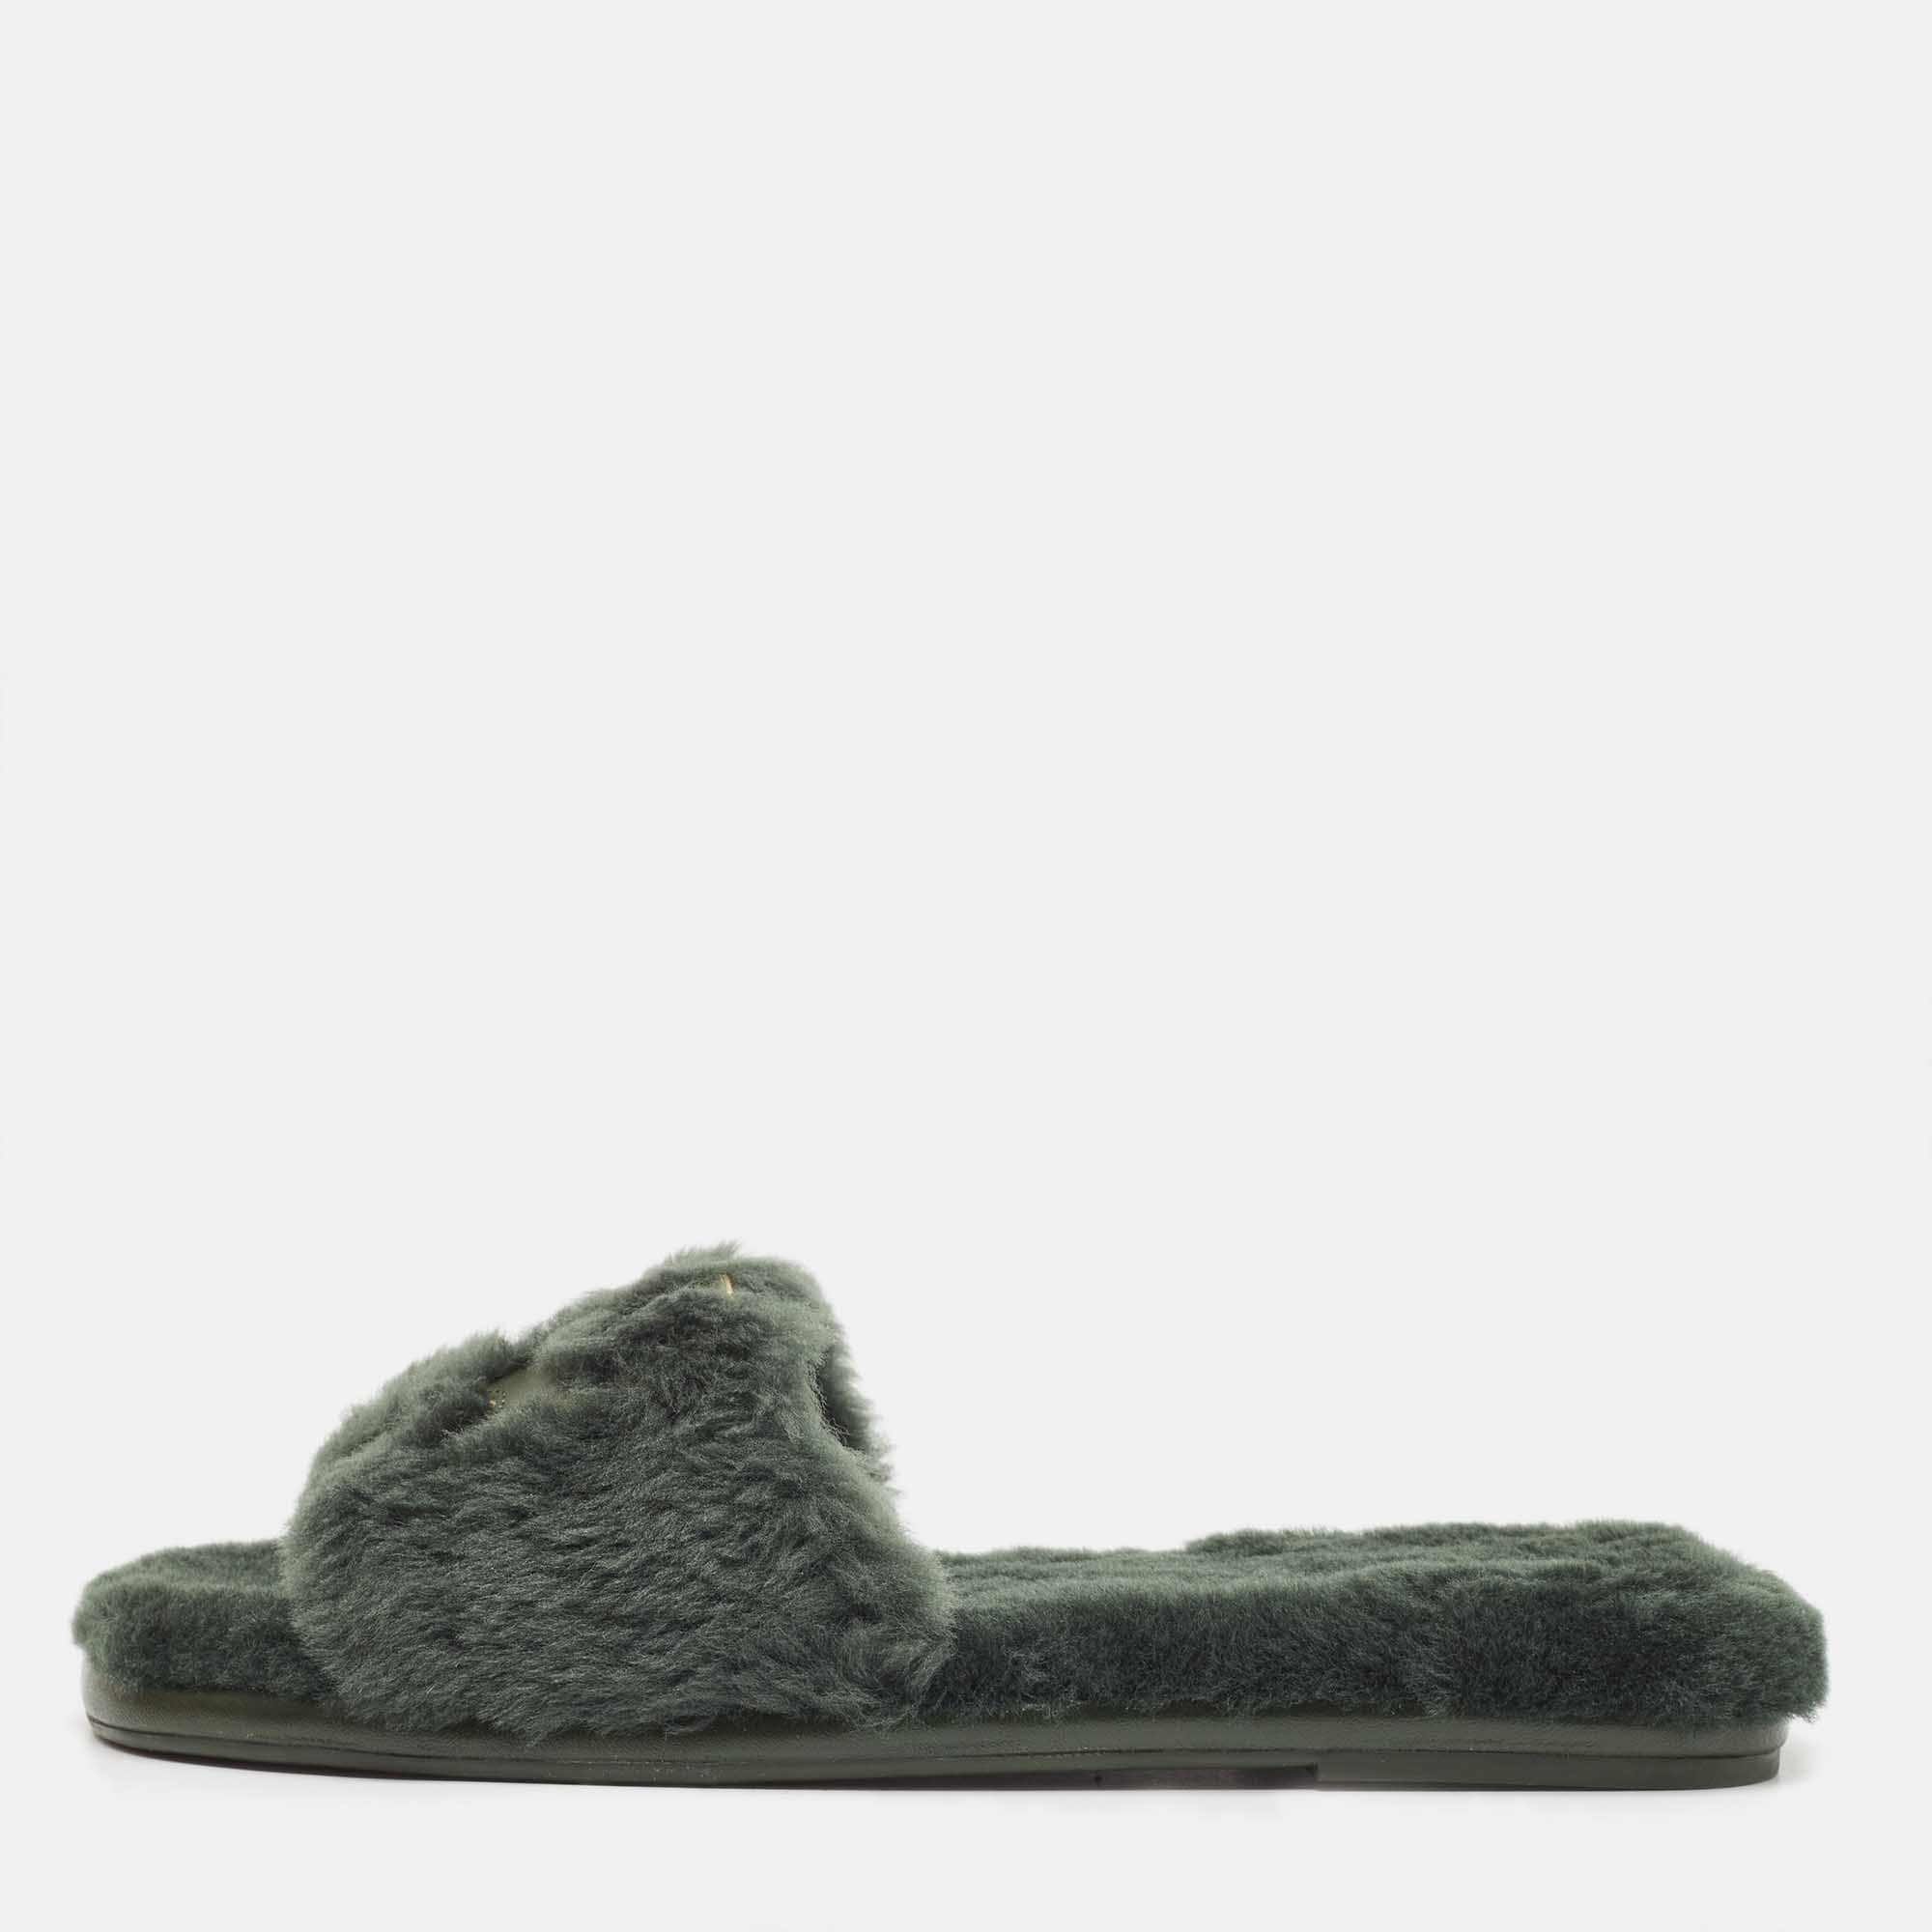 Pre-owned Tory Burch Green Shearling And Leather Flat Slides Size 39